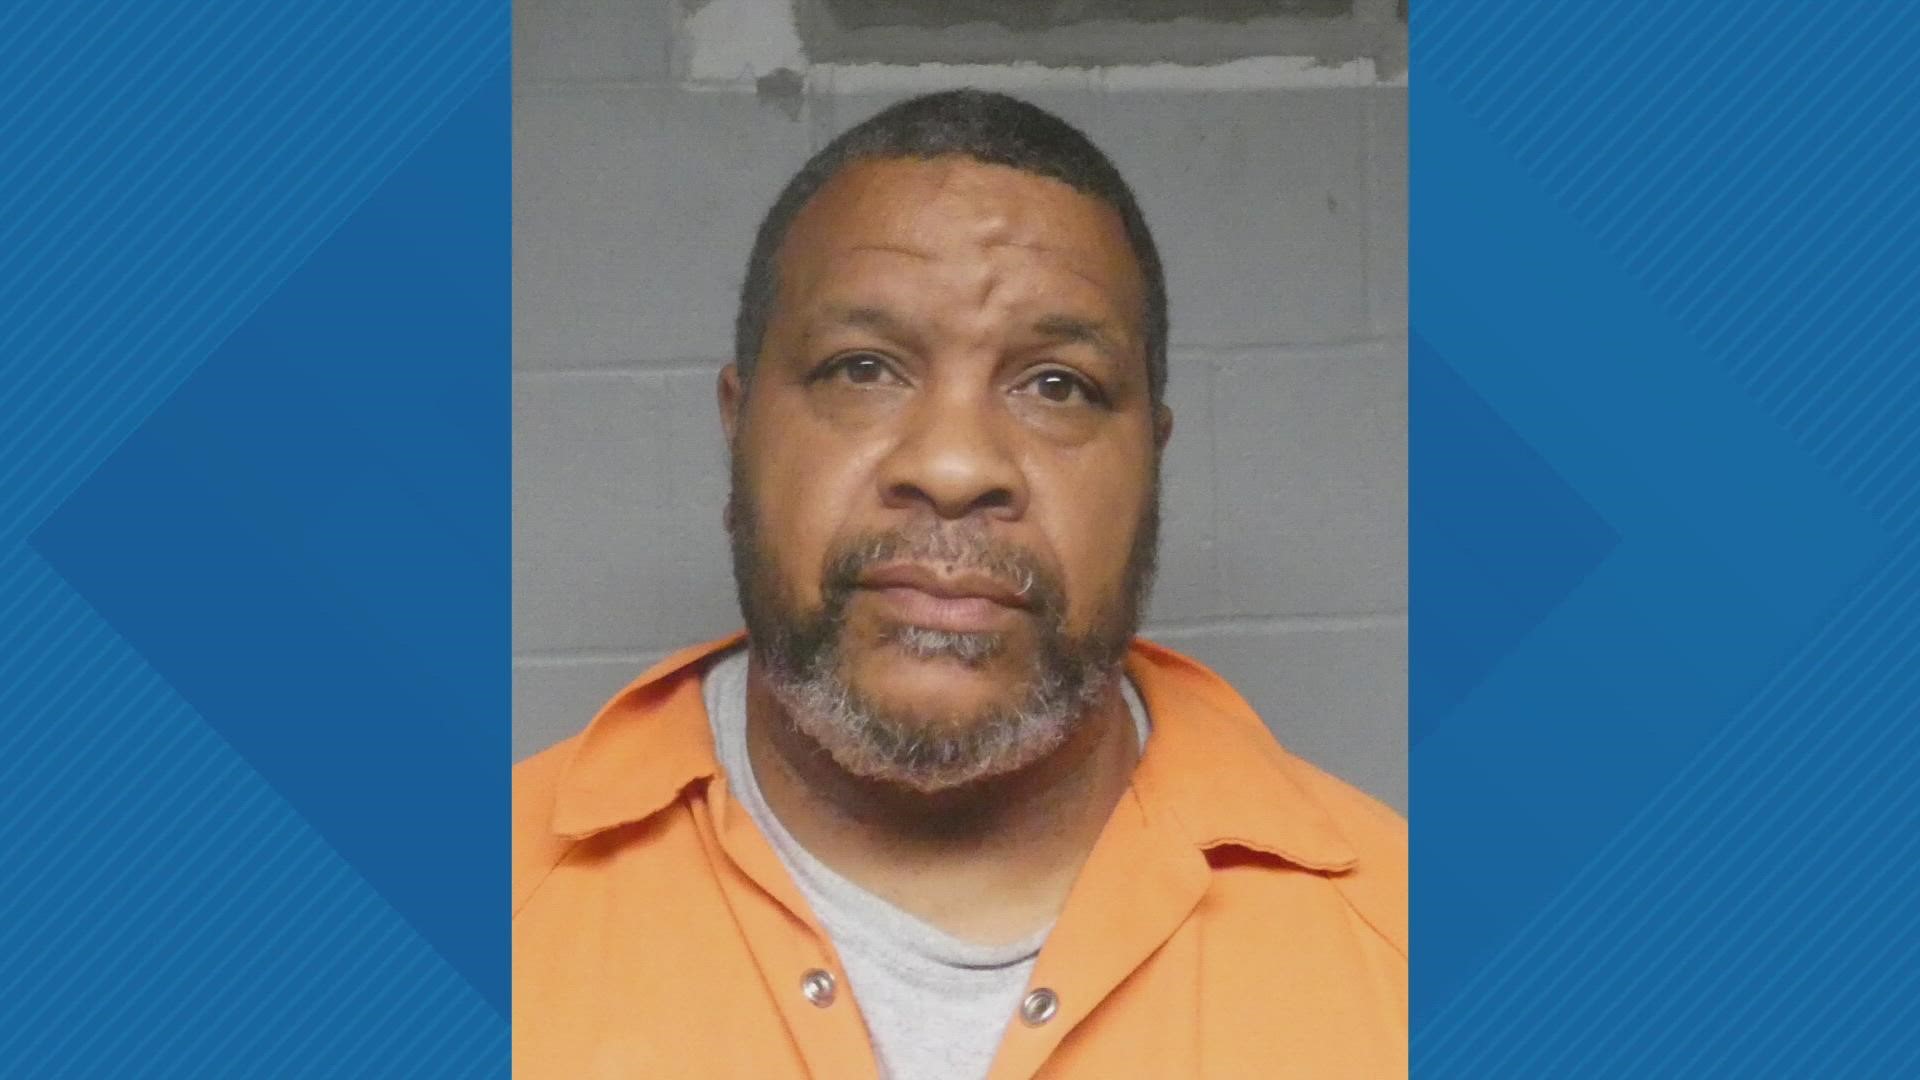 The dogs were being held at the St. Louis Animal Control center. 57-year-old Brian Maclin faces felony charges.